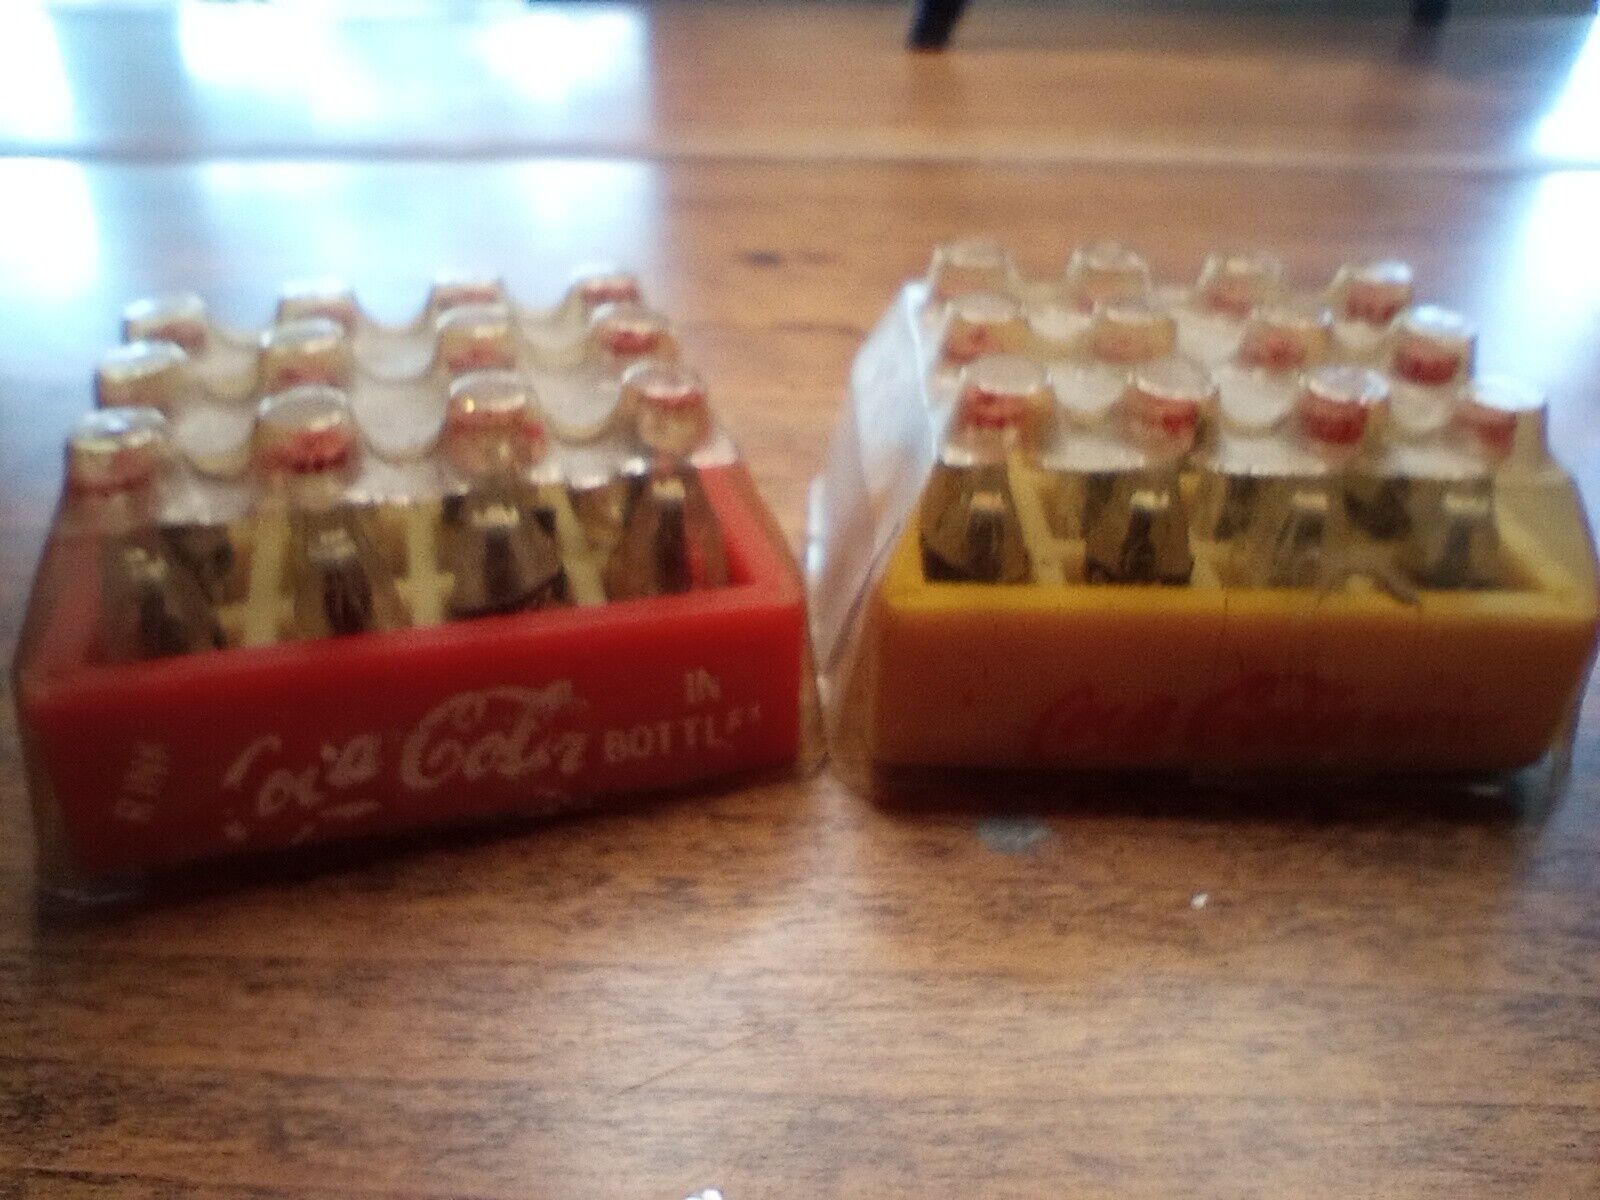 Vintage Antique Coca Cola Bottles Cases Red Yellow Dollhouse Original Packaging